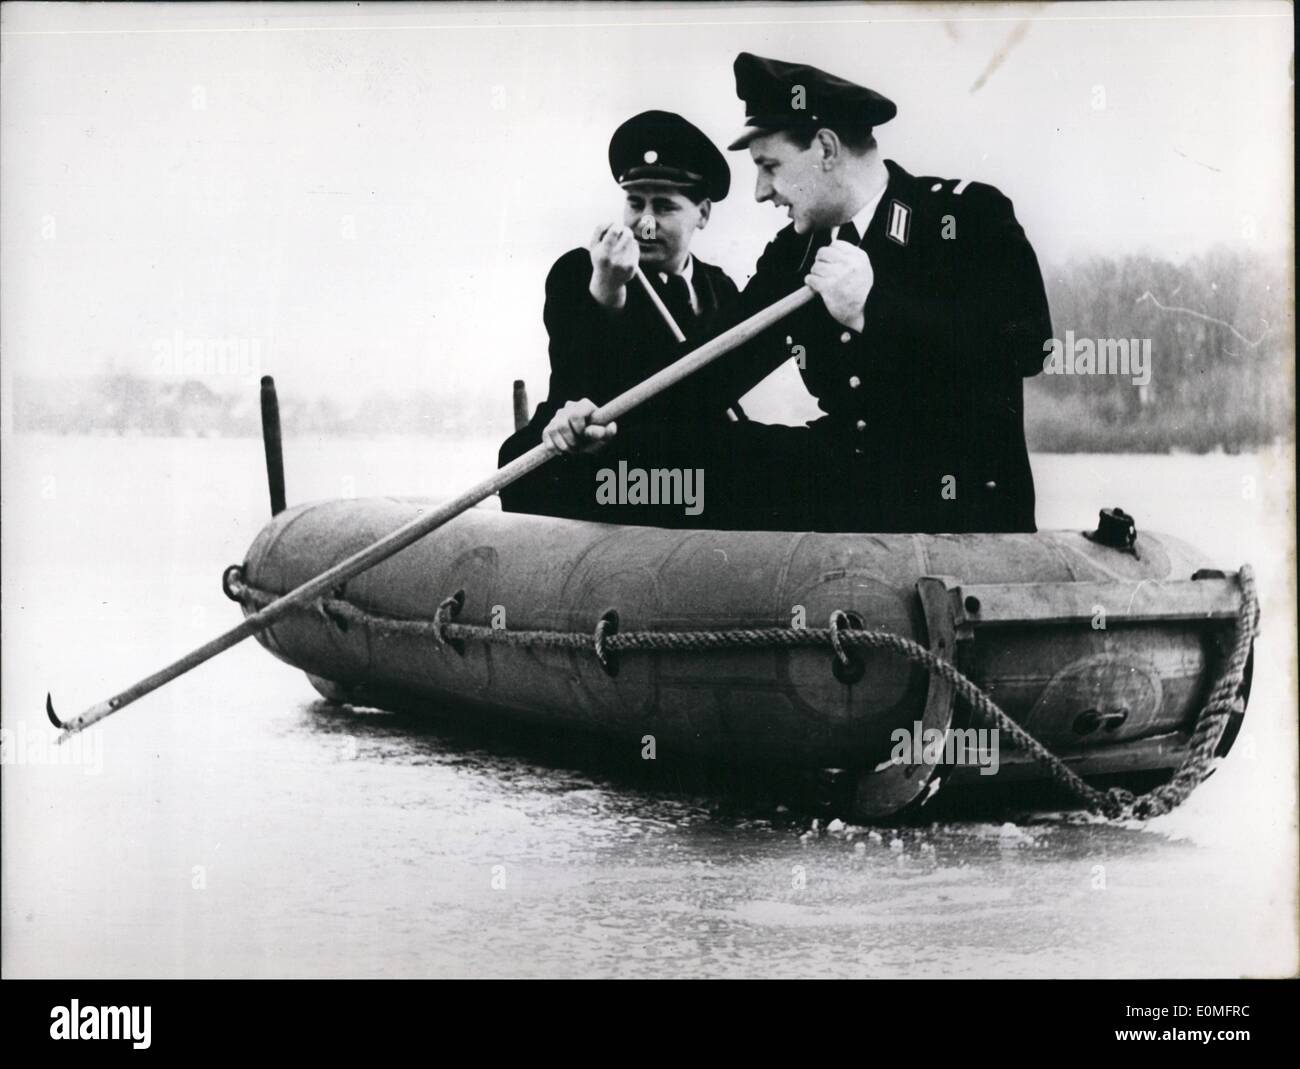 Mar. 03, 1955 - Tube - boats with sledge-runners The water-police of Berlin now put in tube-boats with runners to help drawing people. It is possible to push this vehicle very quickly over the ice. Stock Photo